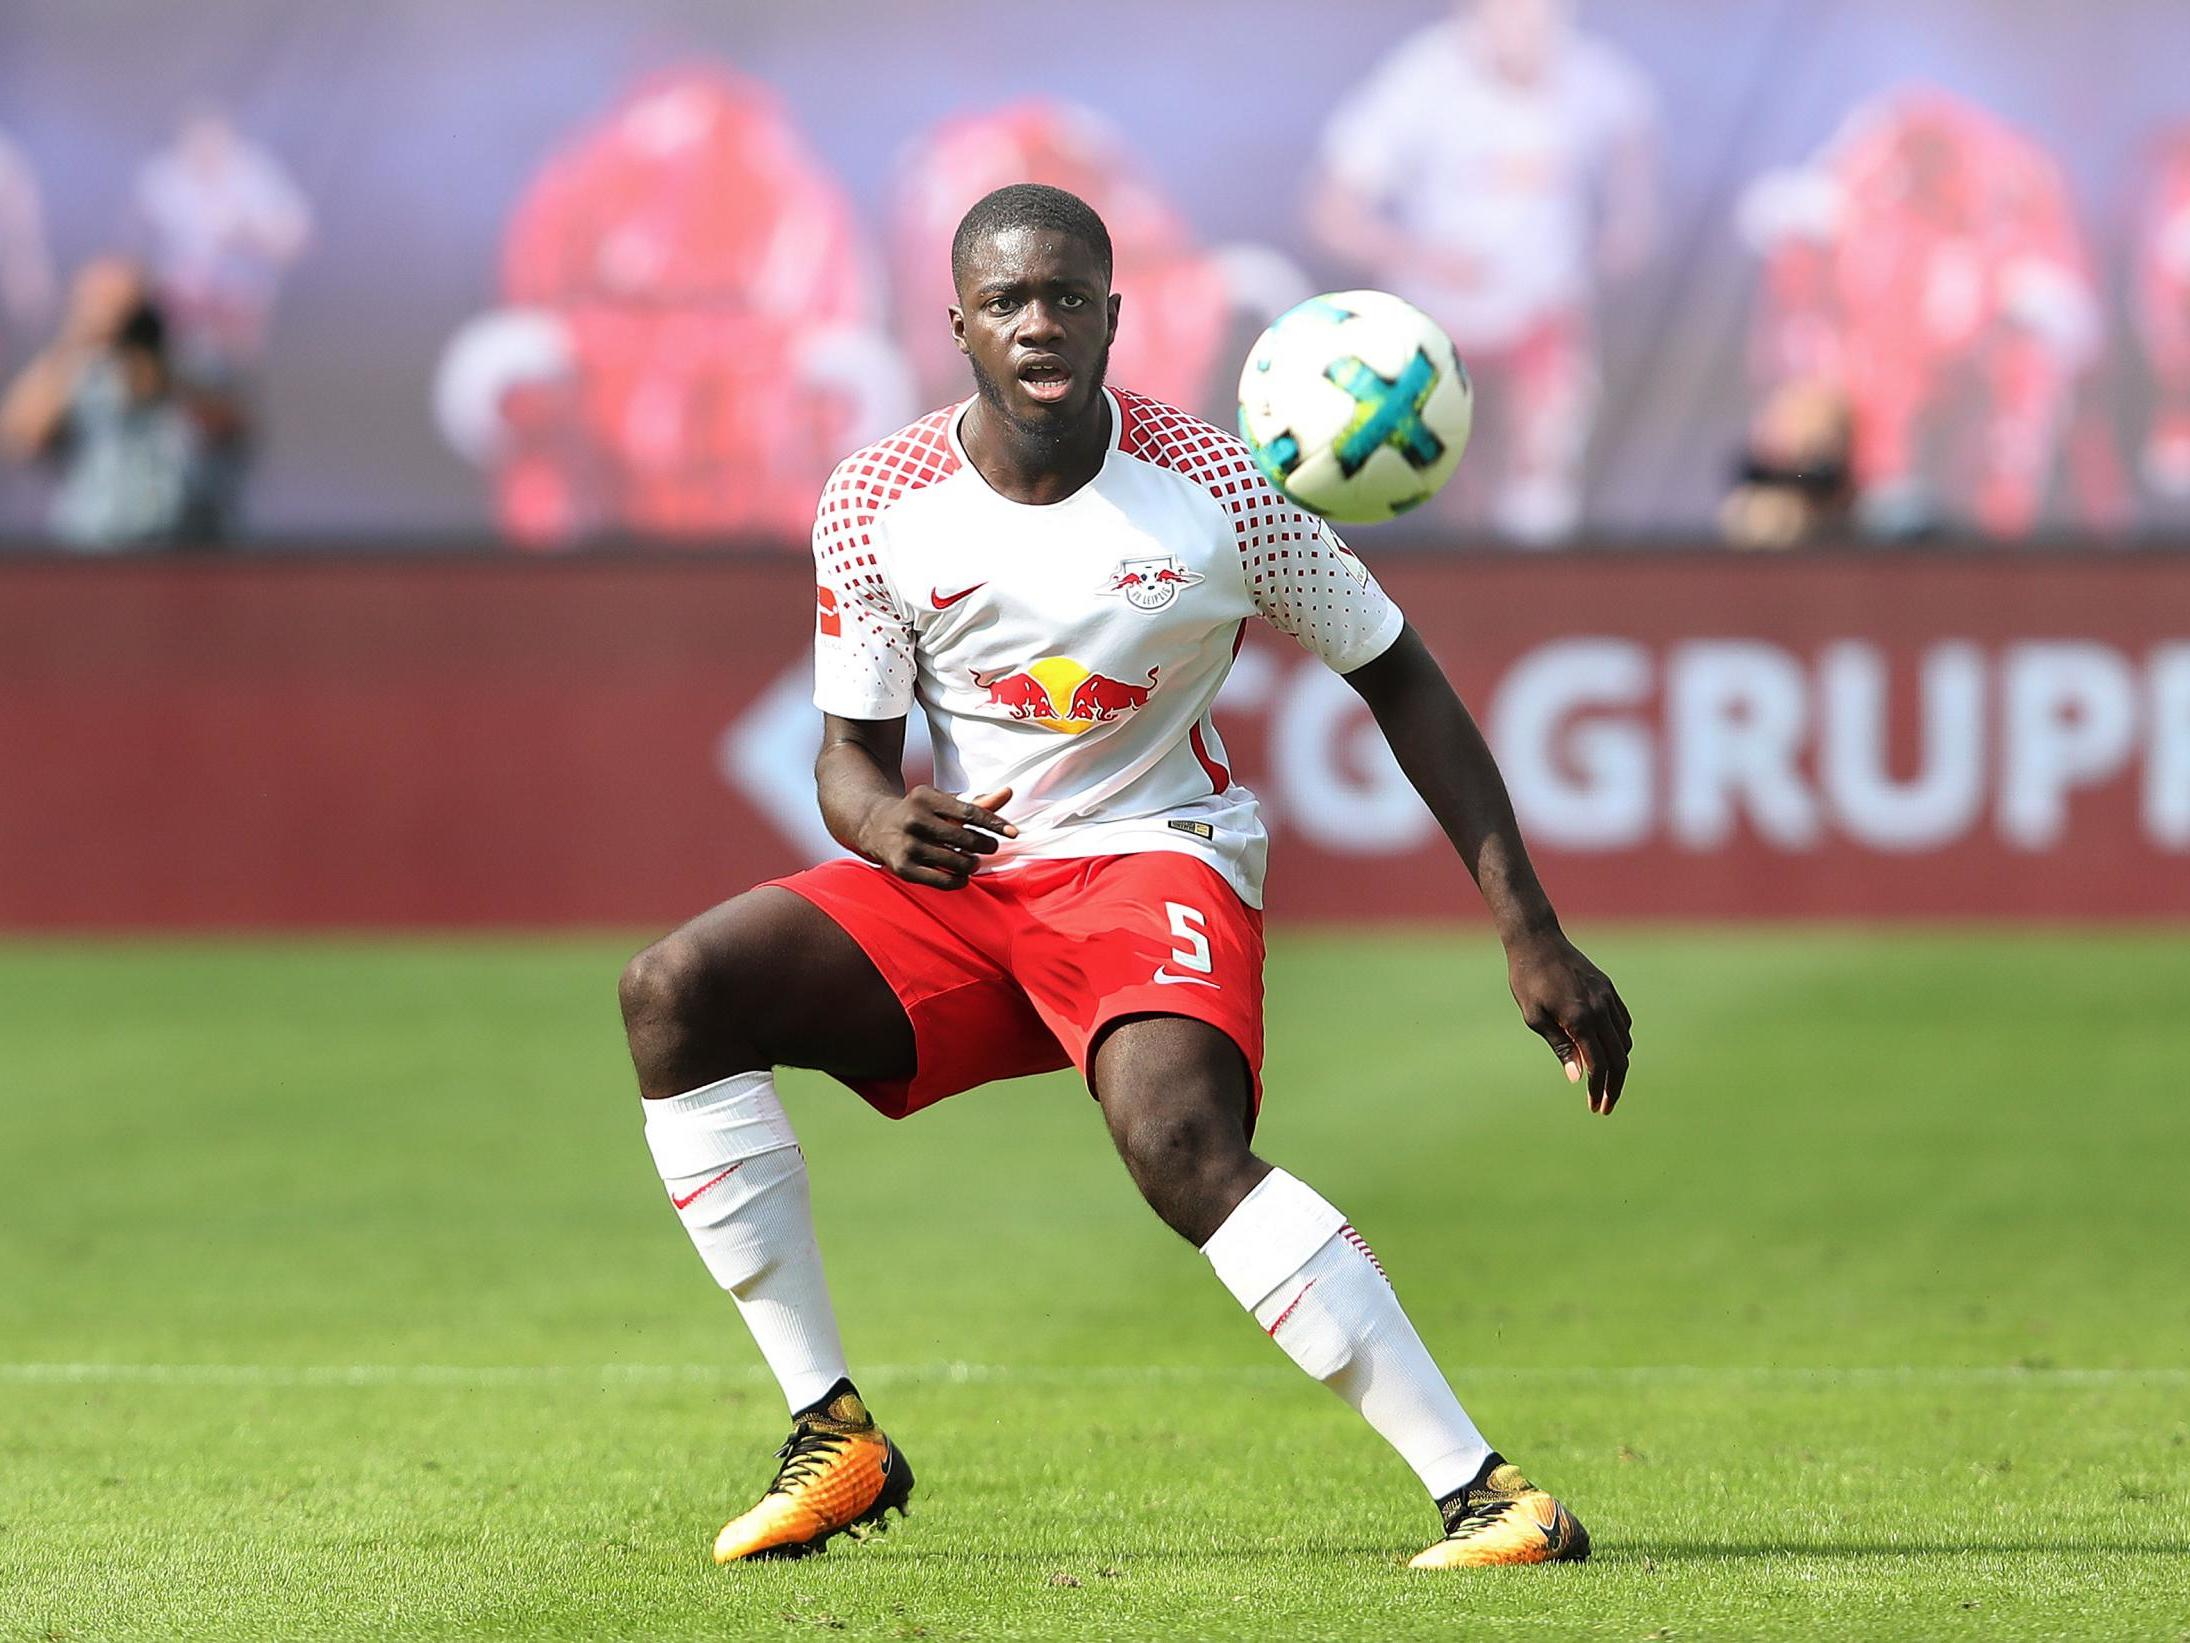 Defender Dayot Upamecano is a product of the Red Bull franchise system